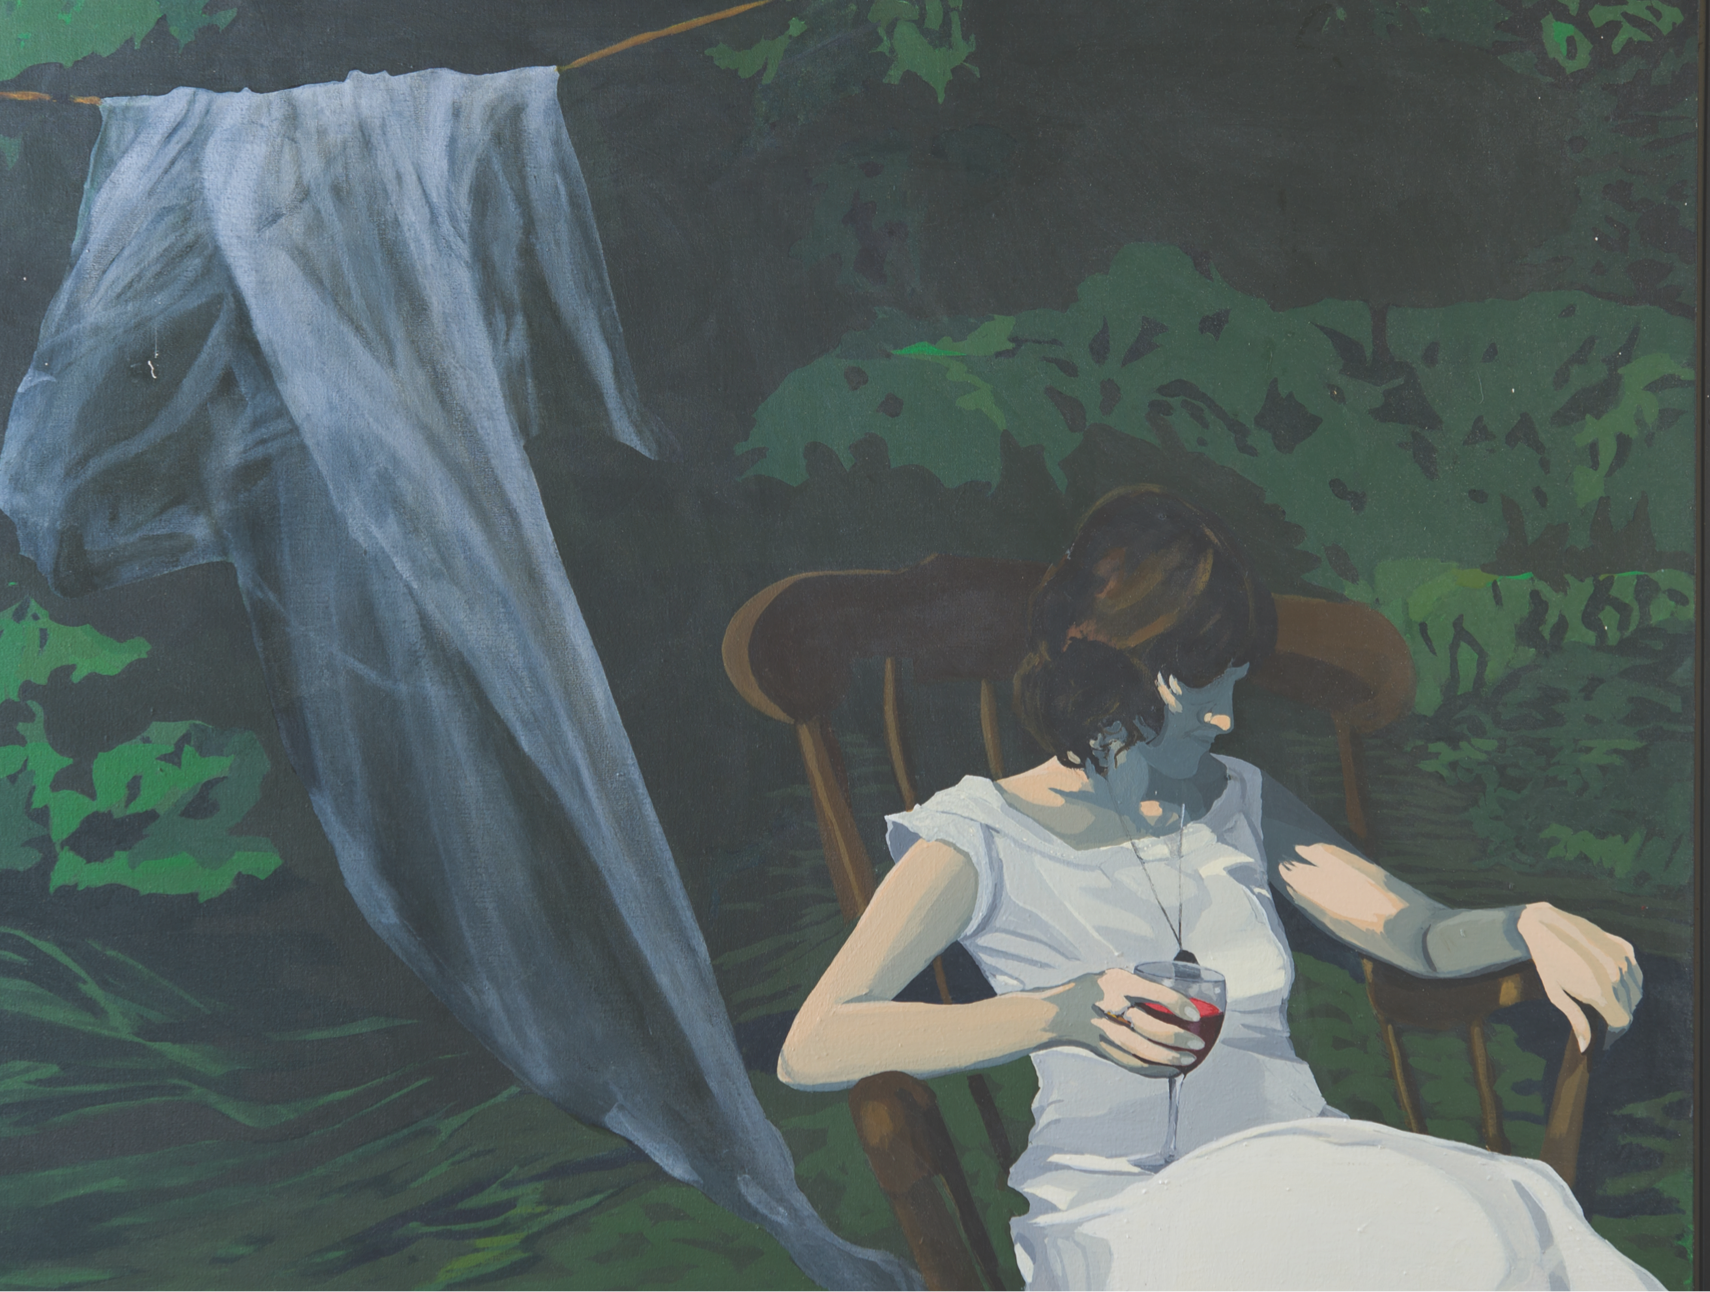 Stylizing image of woman sitting in a rocking chair with a white dress